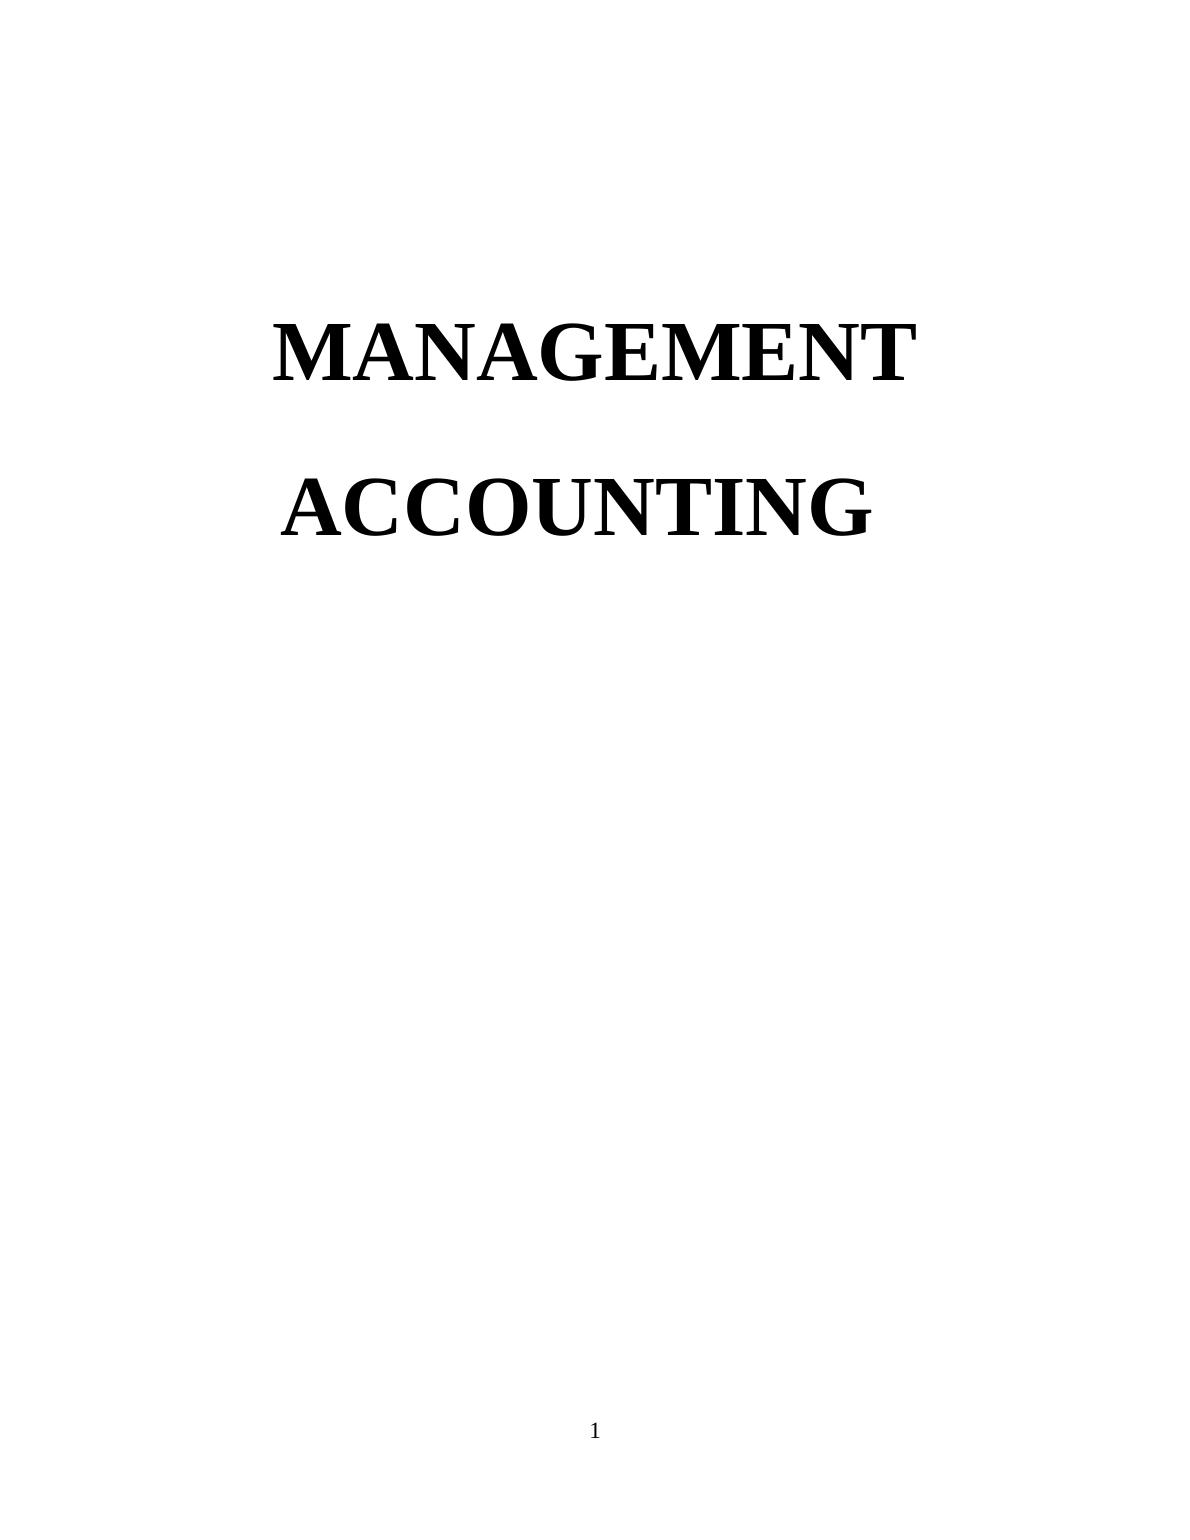 Evaluation of Management Accounting Systems_1